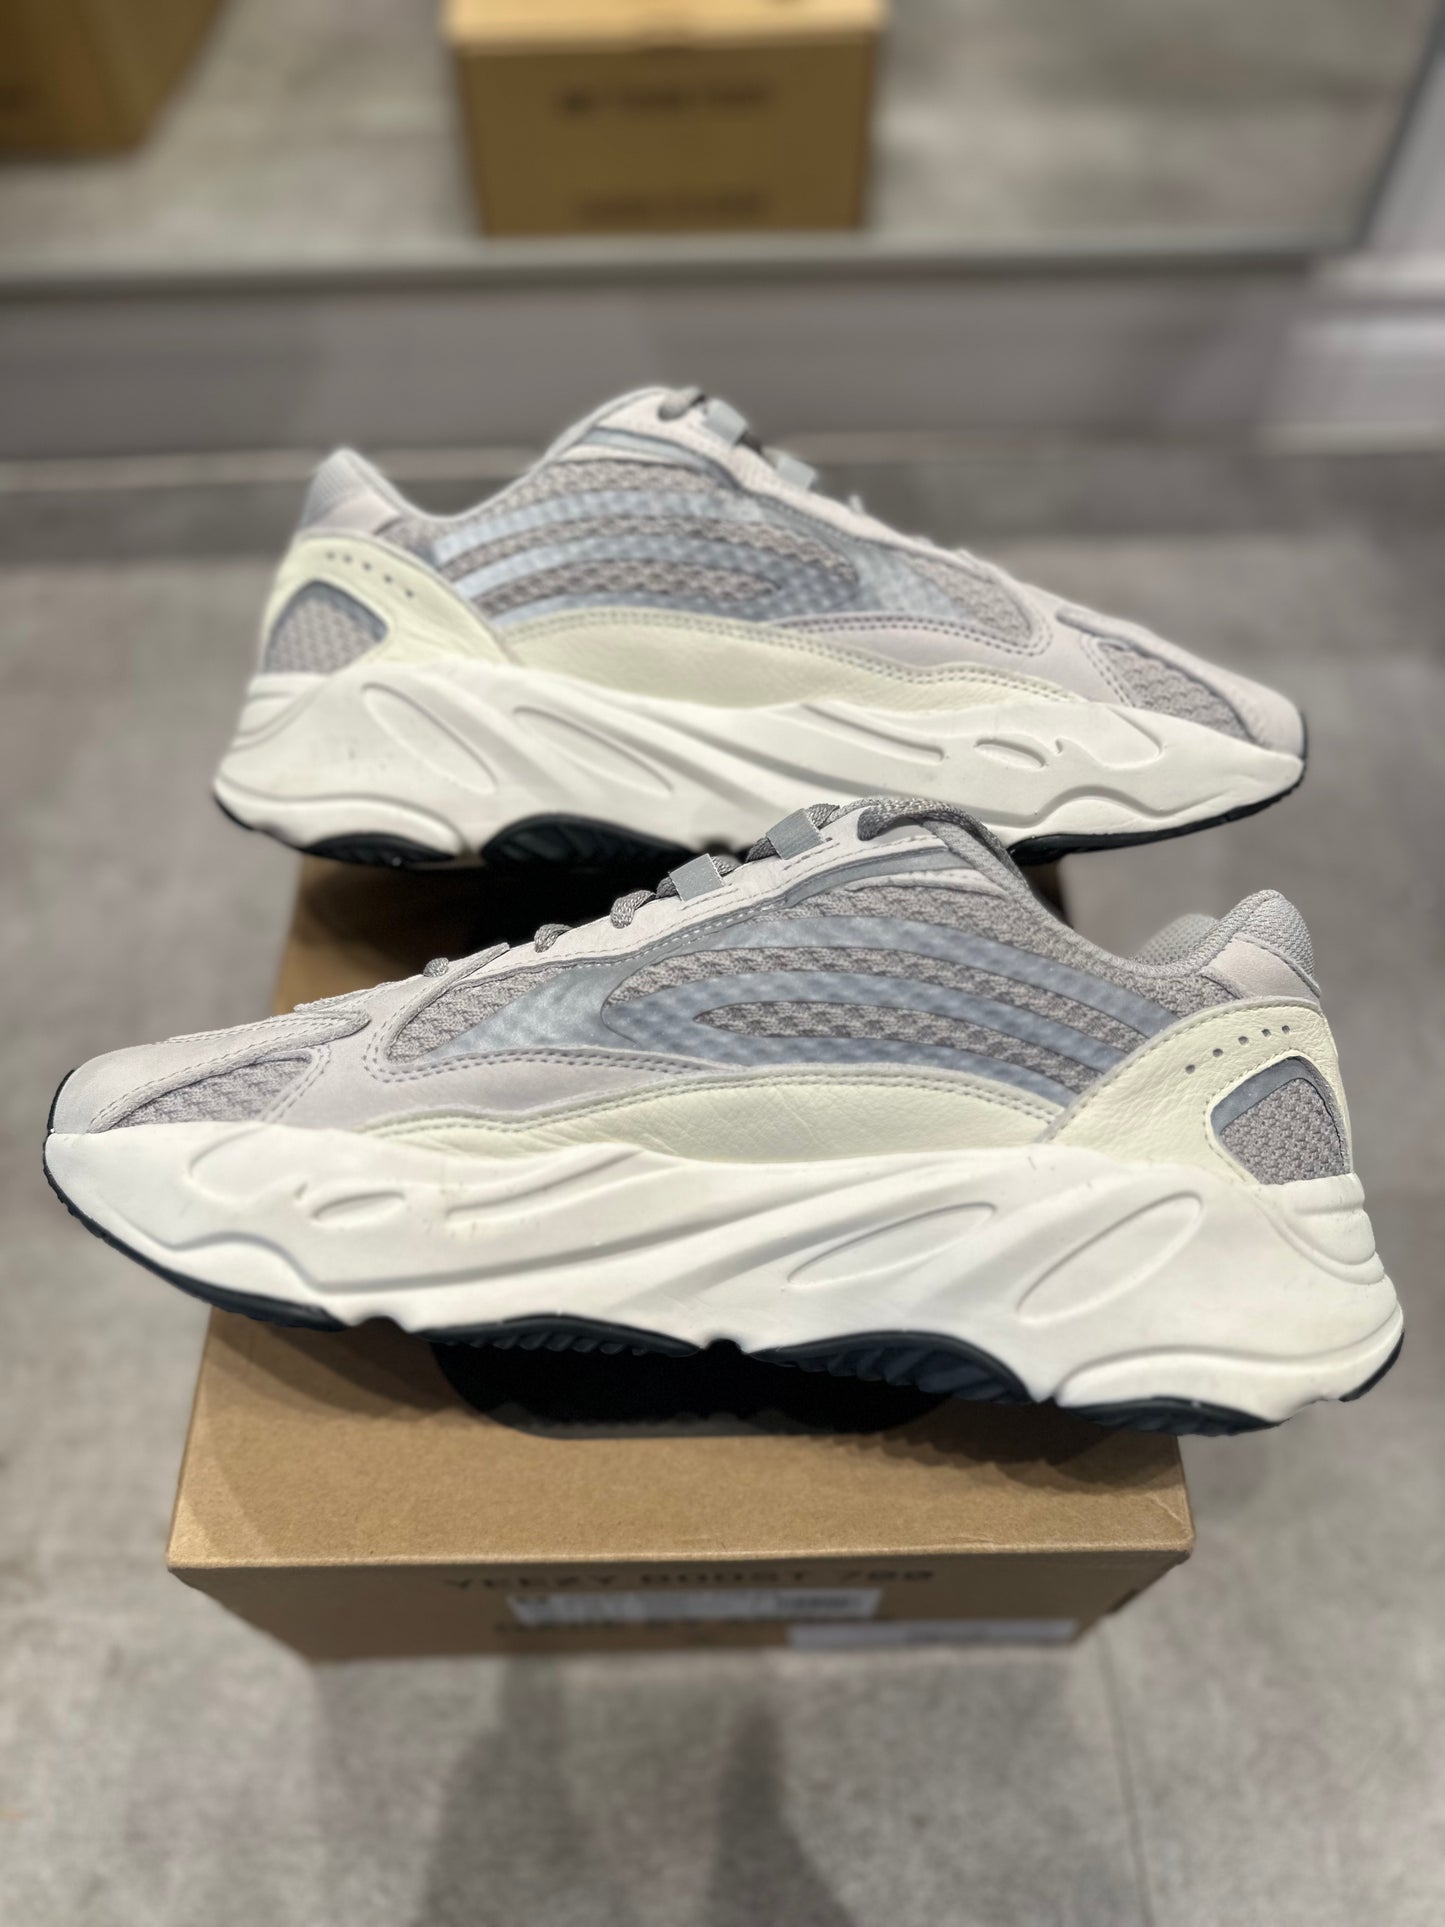 Adidas Yeezy Boost 700 V2 Static (Preowned)